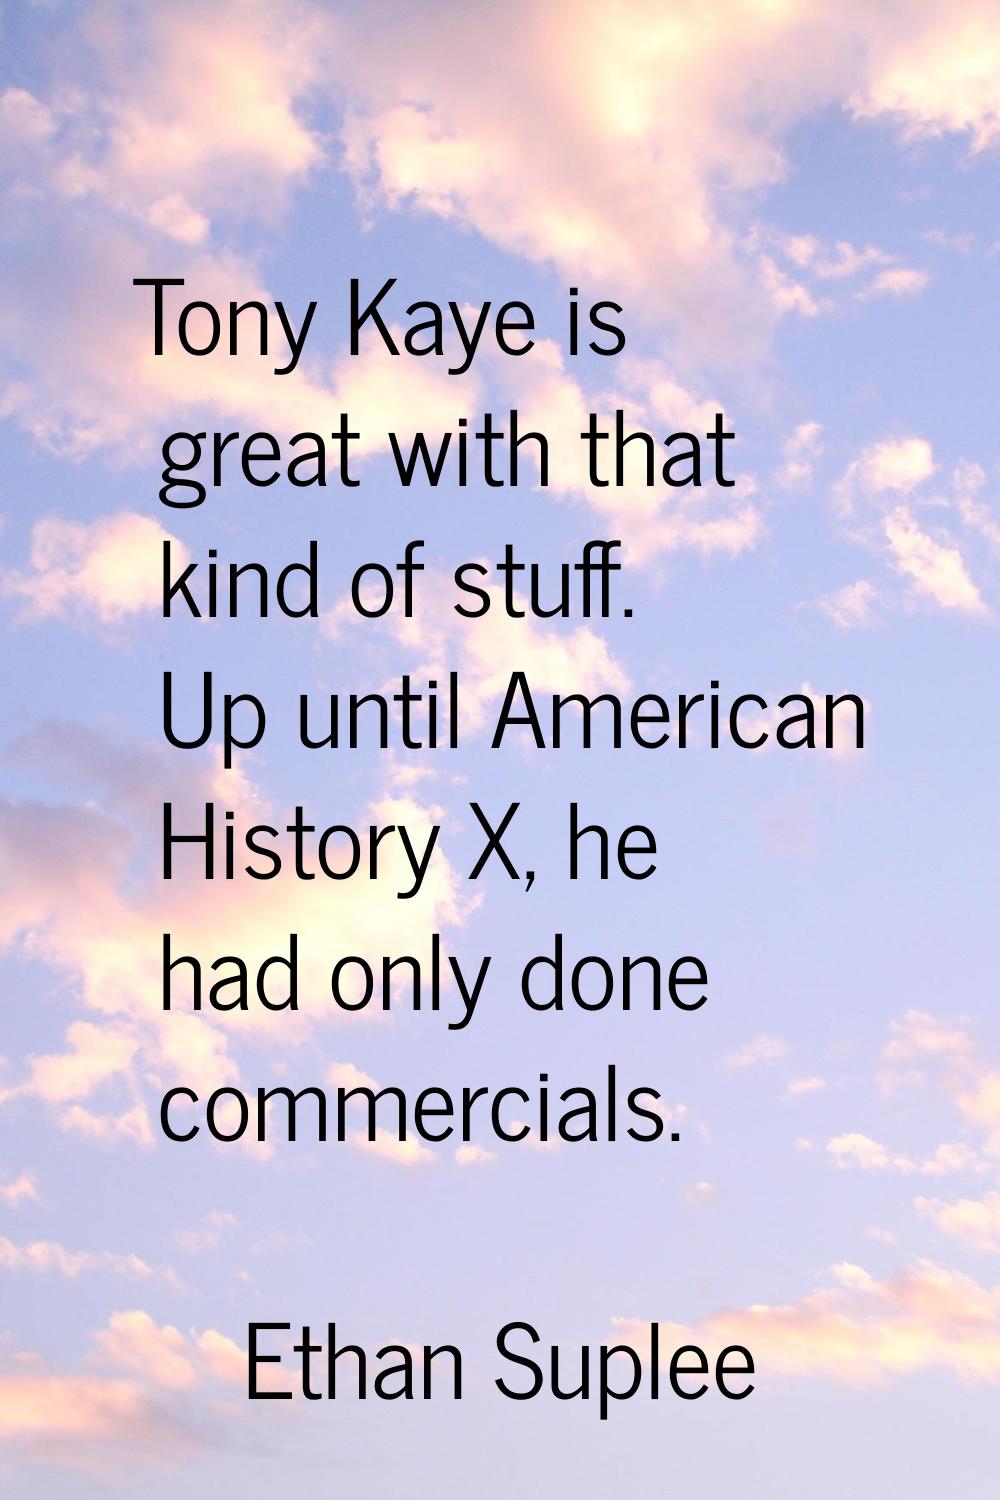 Tony Kaye is great with that kind of stuff. Up until American History X, he had only done commercia